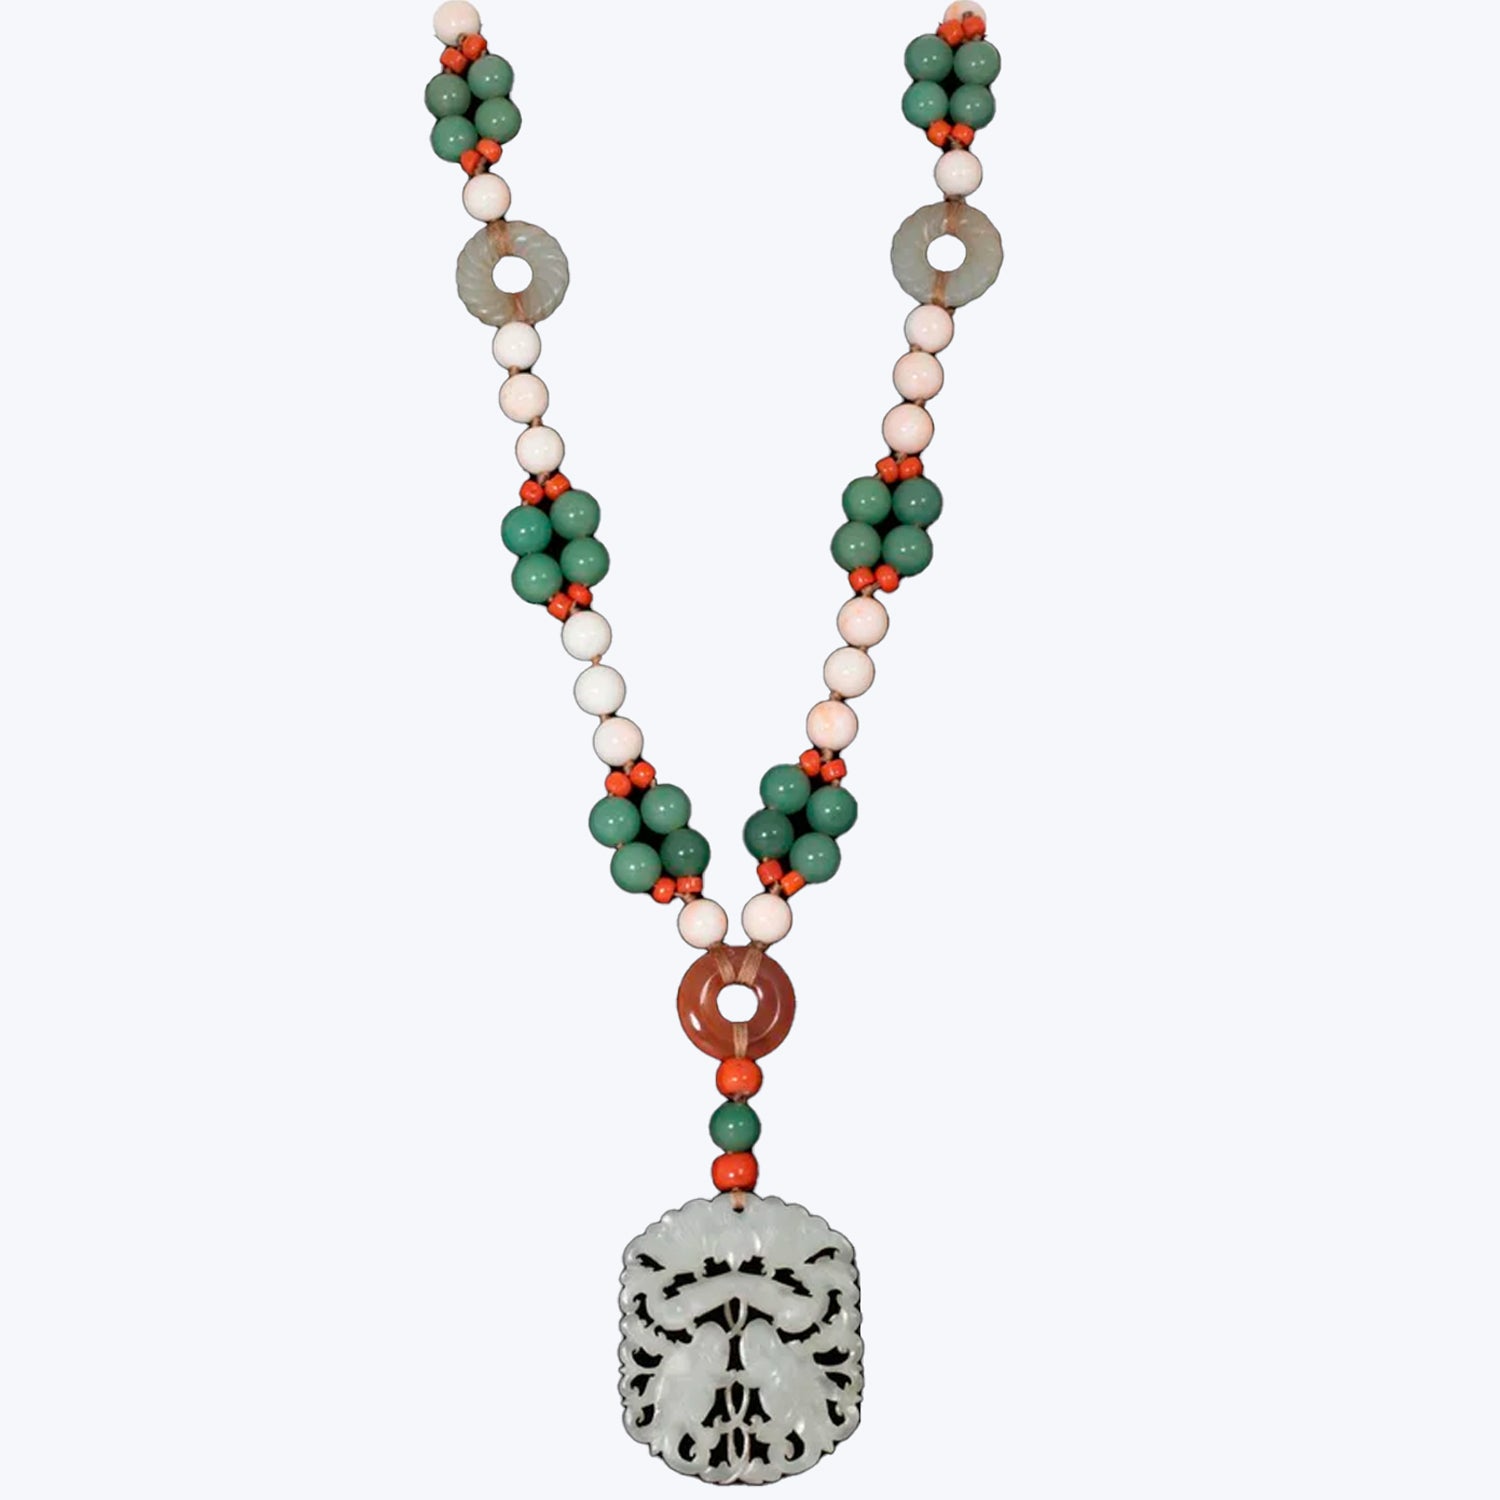 Artisanal necklace features alternating green and red beads leading to skull pendant.